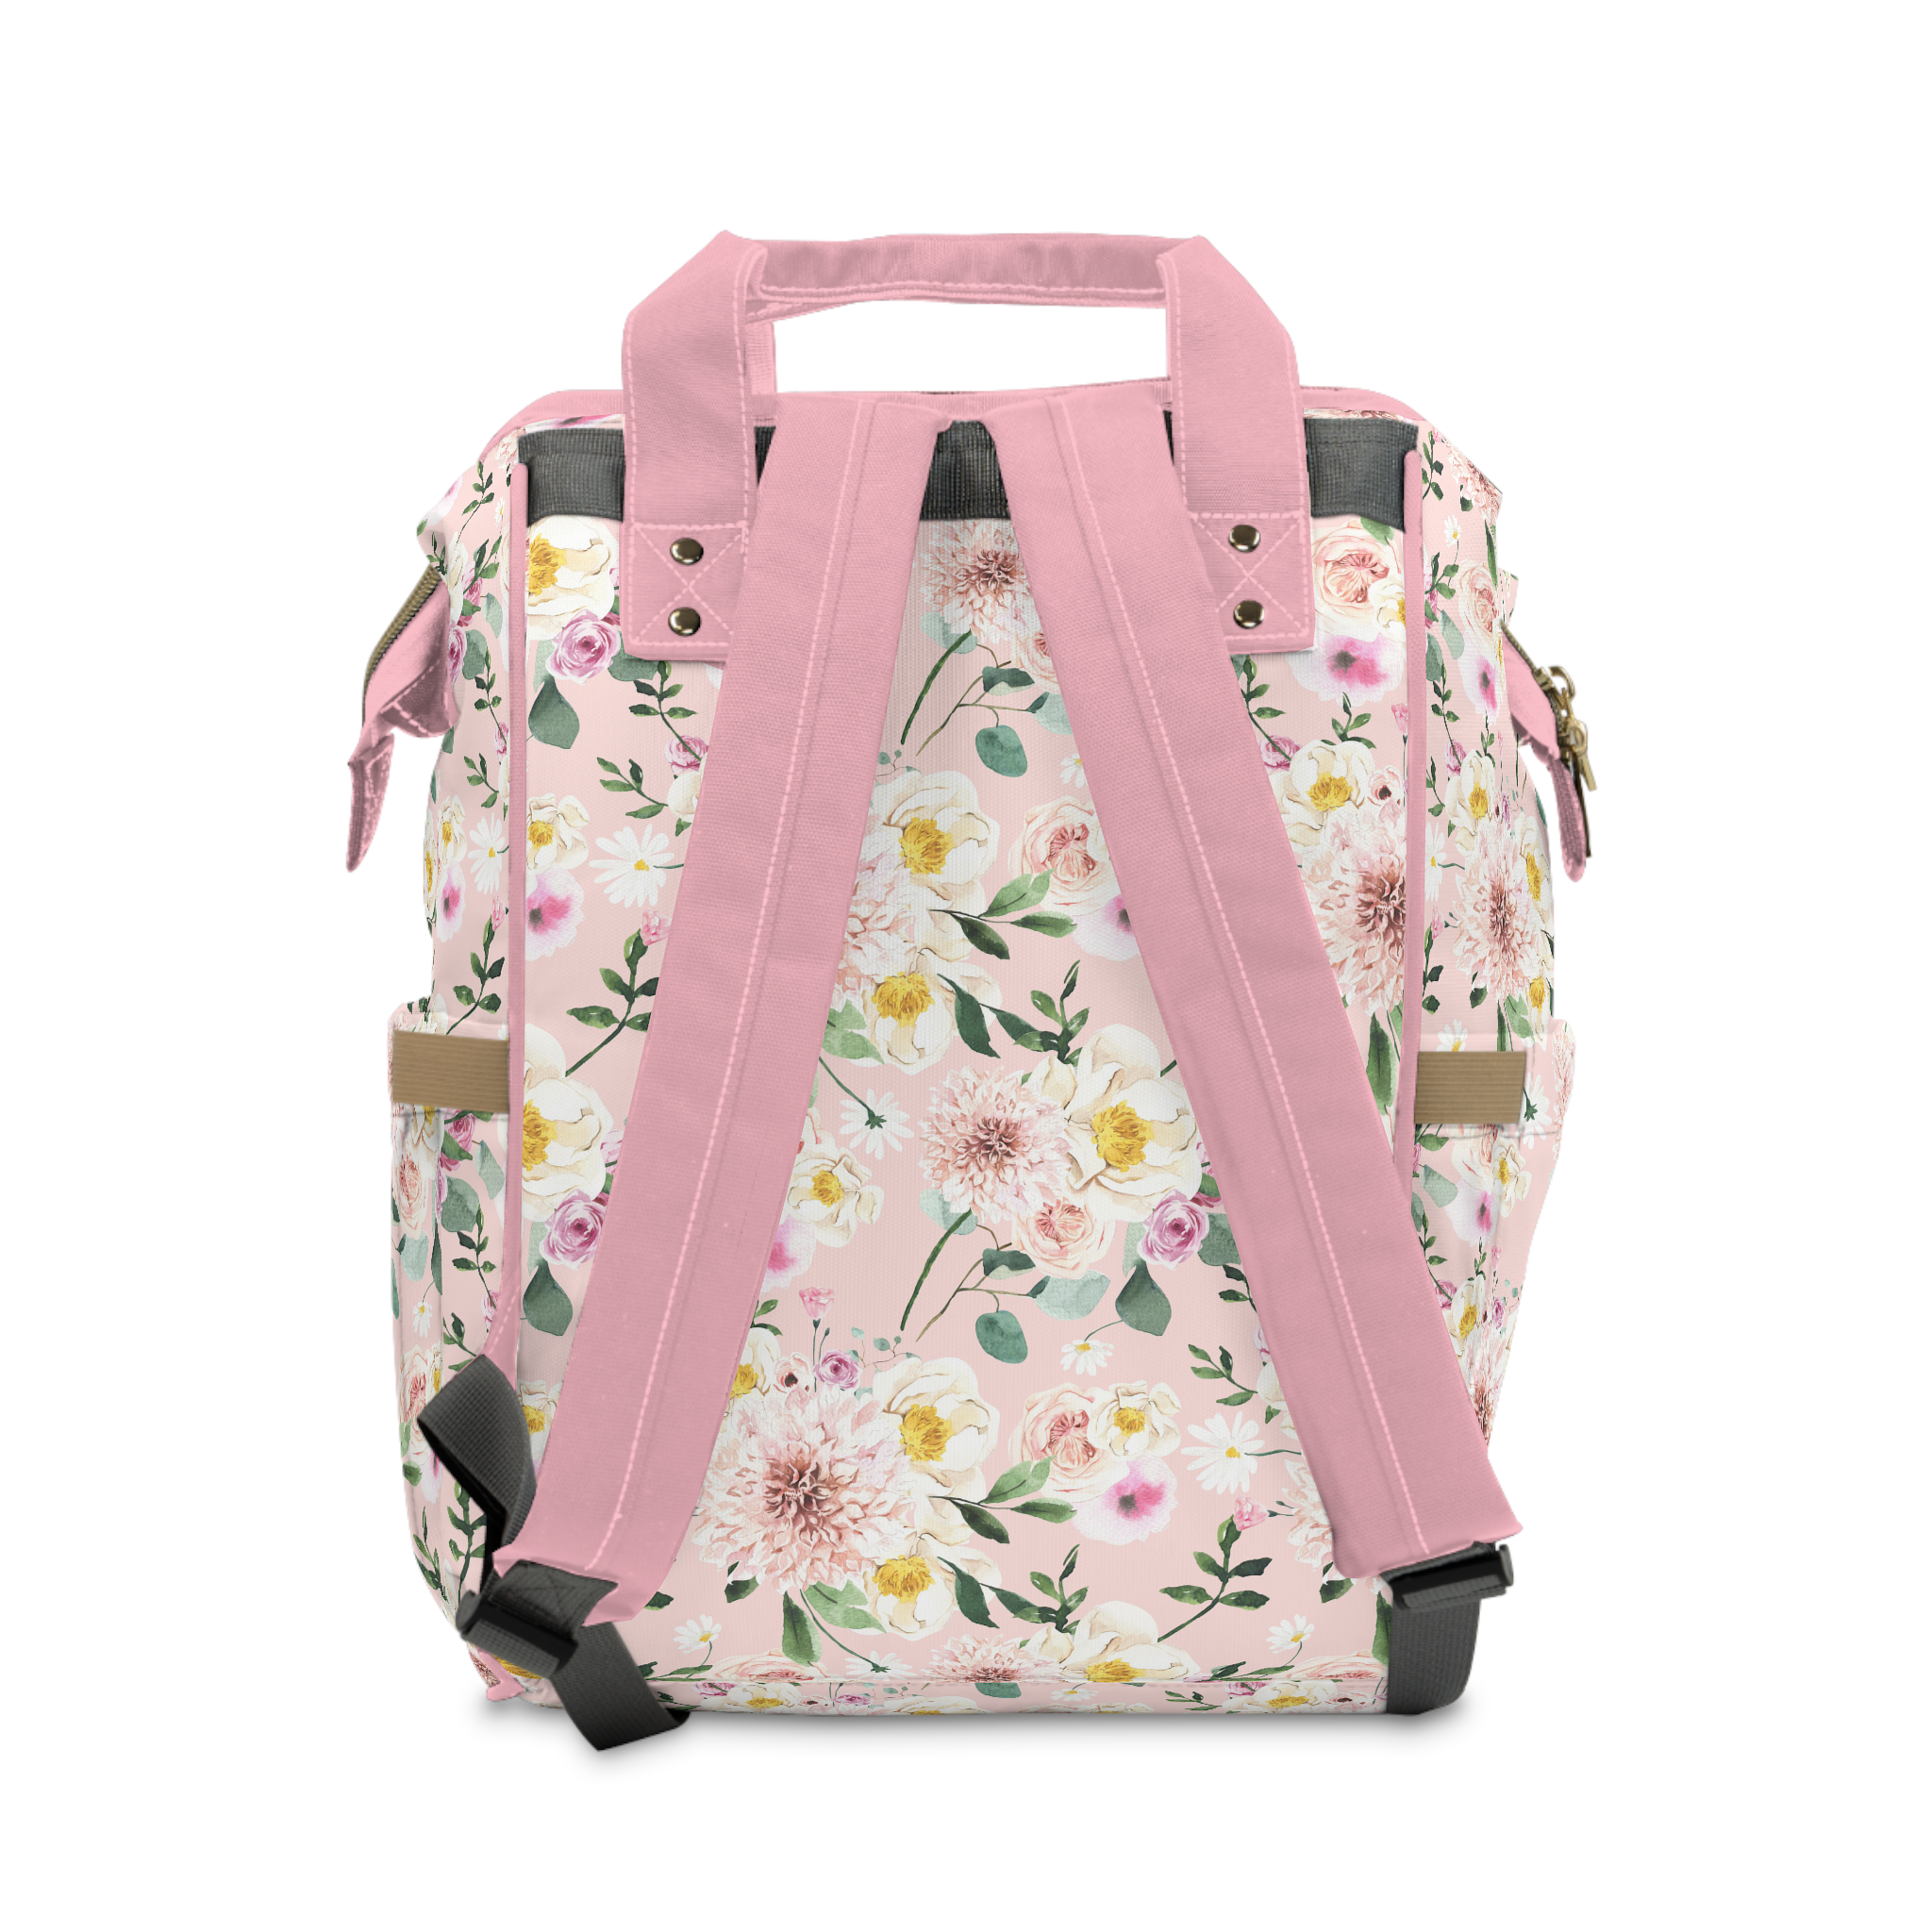 Farm Floral Personalized Backpack Diaper Bag - Farm Floral, gender_girl, text